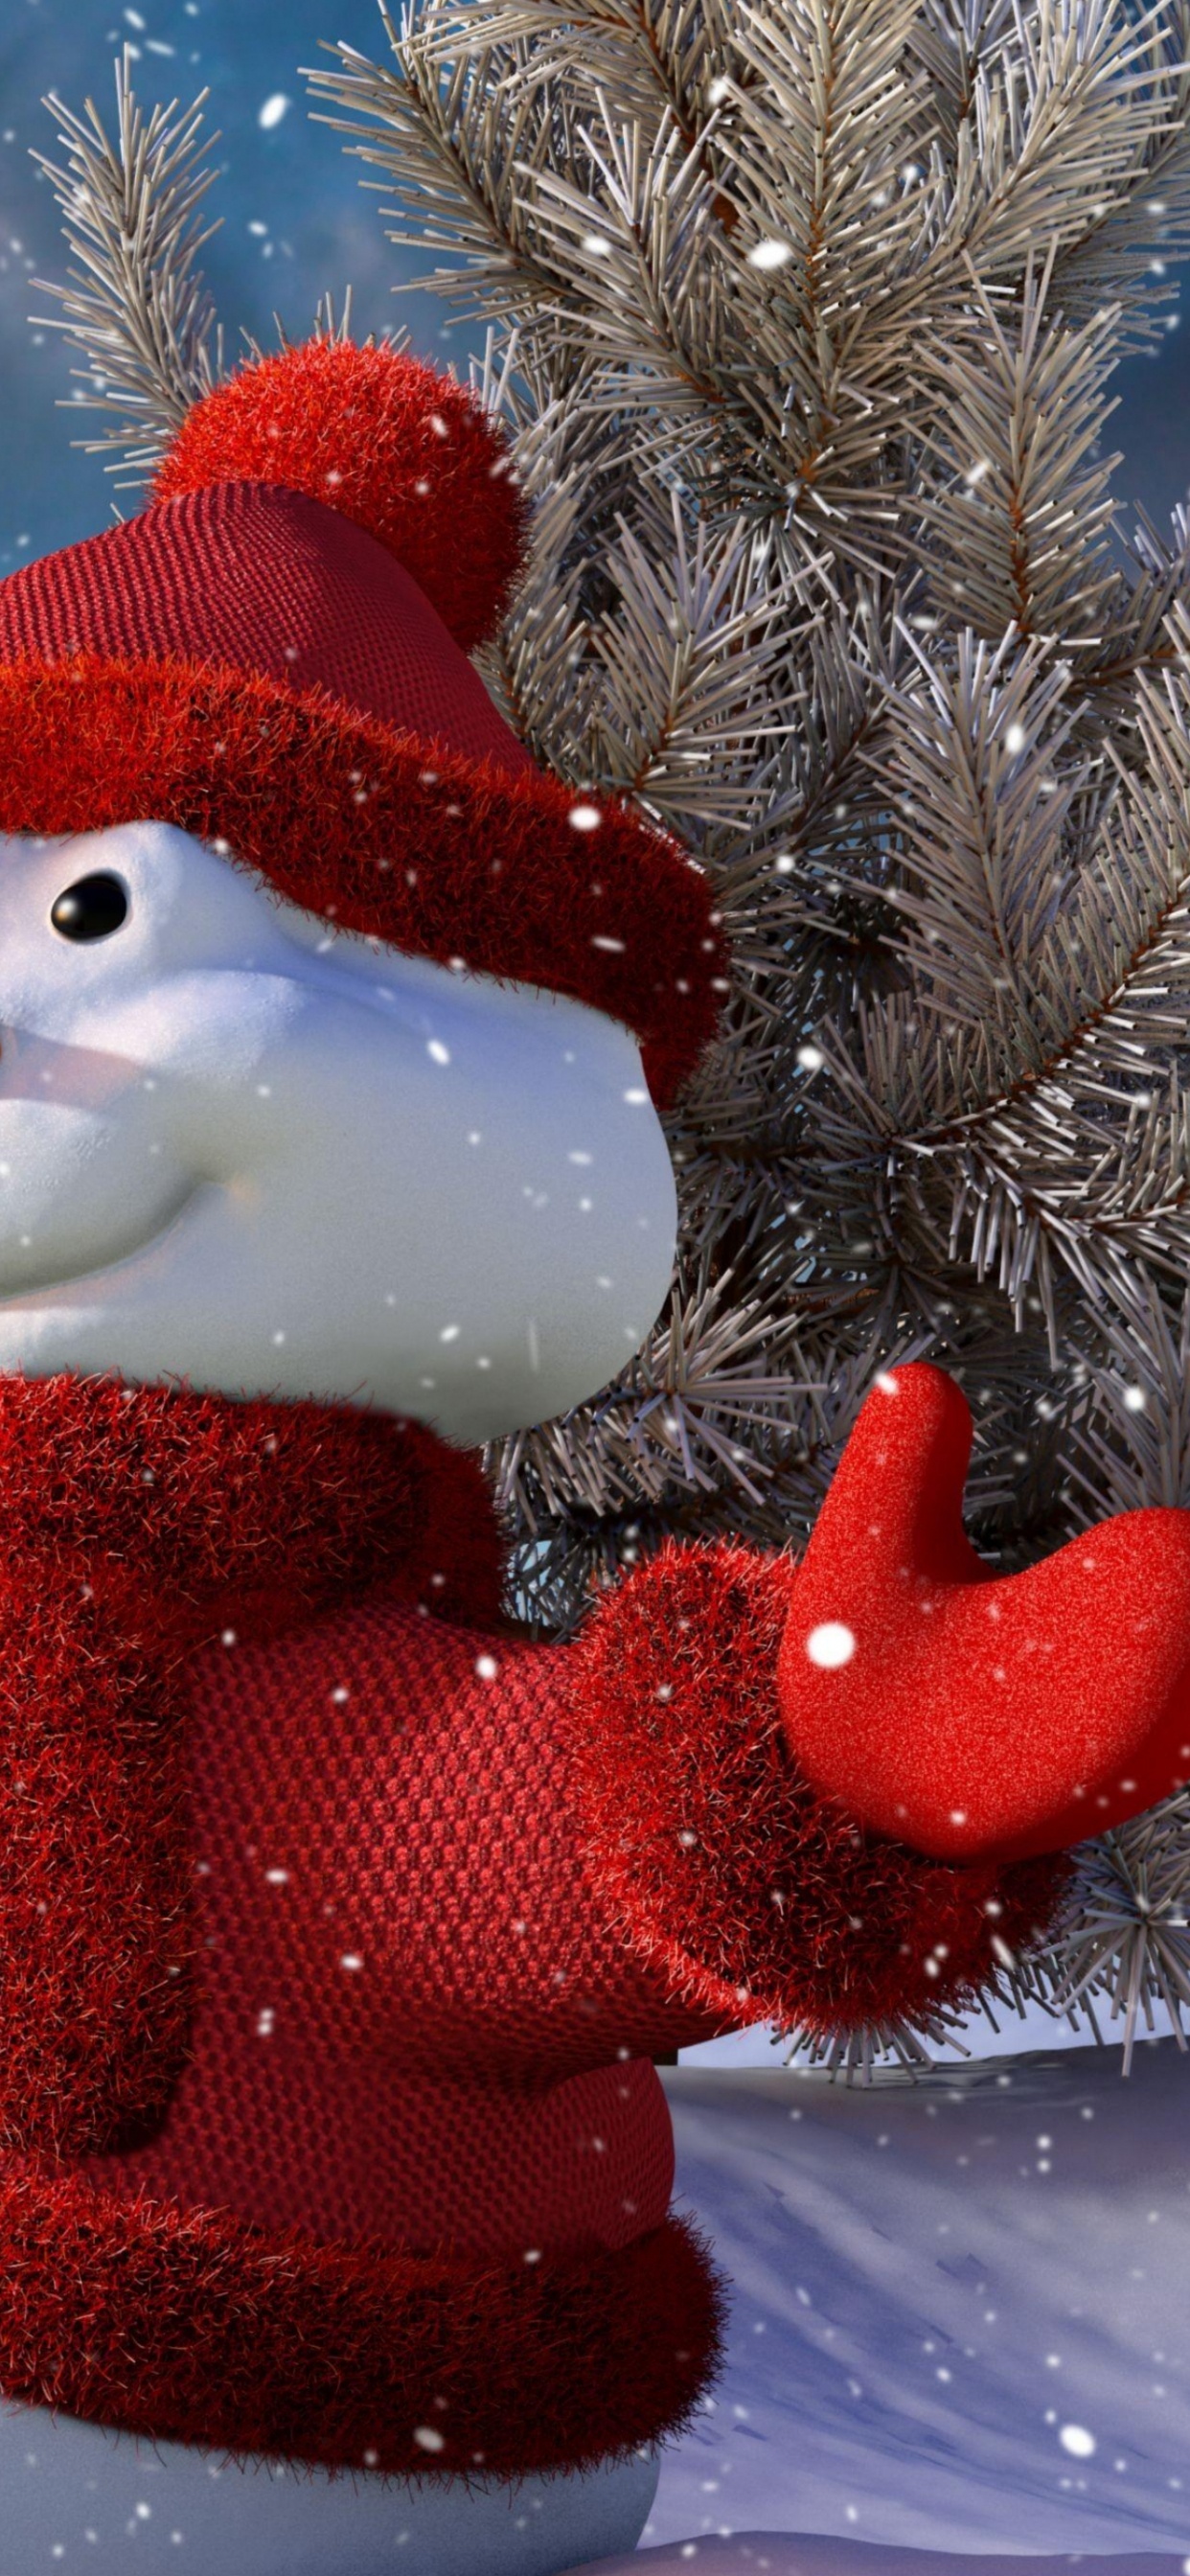 Snowman, Christmas, Space, Freezing, Christmas Tree. Wallpaper in 1242x2688 Resolution